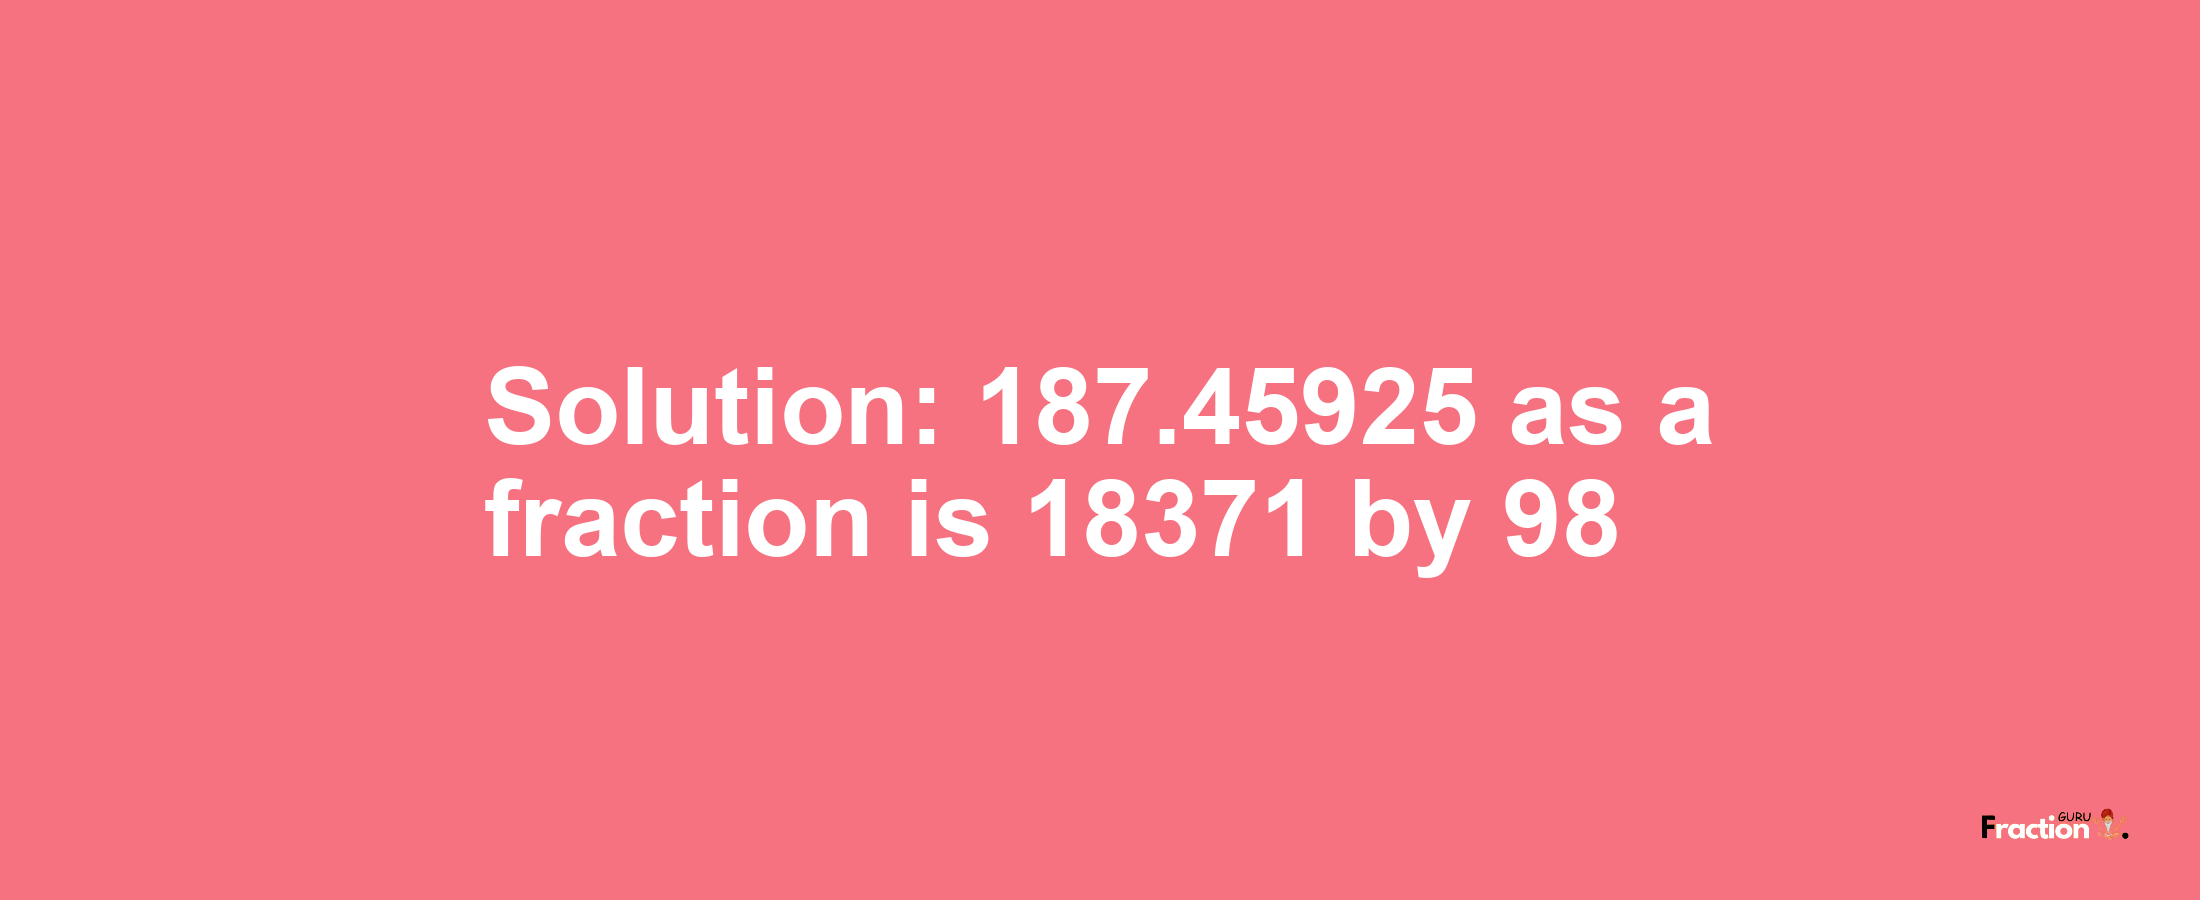 Solution:187.45925 as a fraction is 18371/98